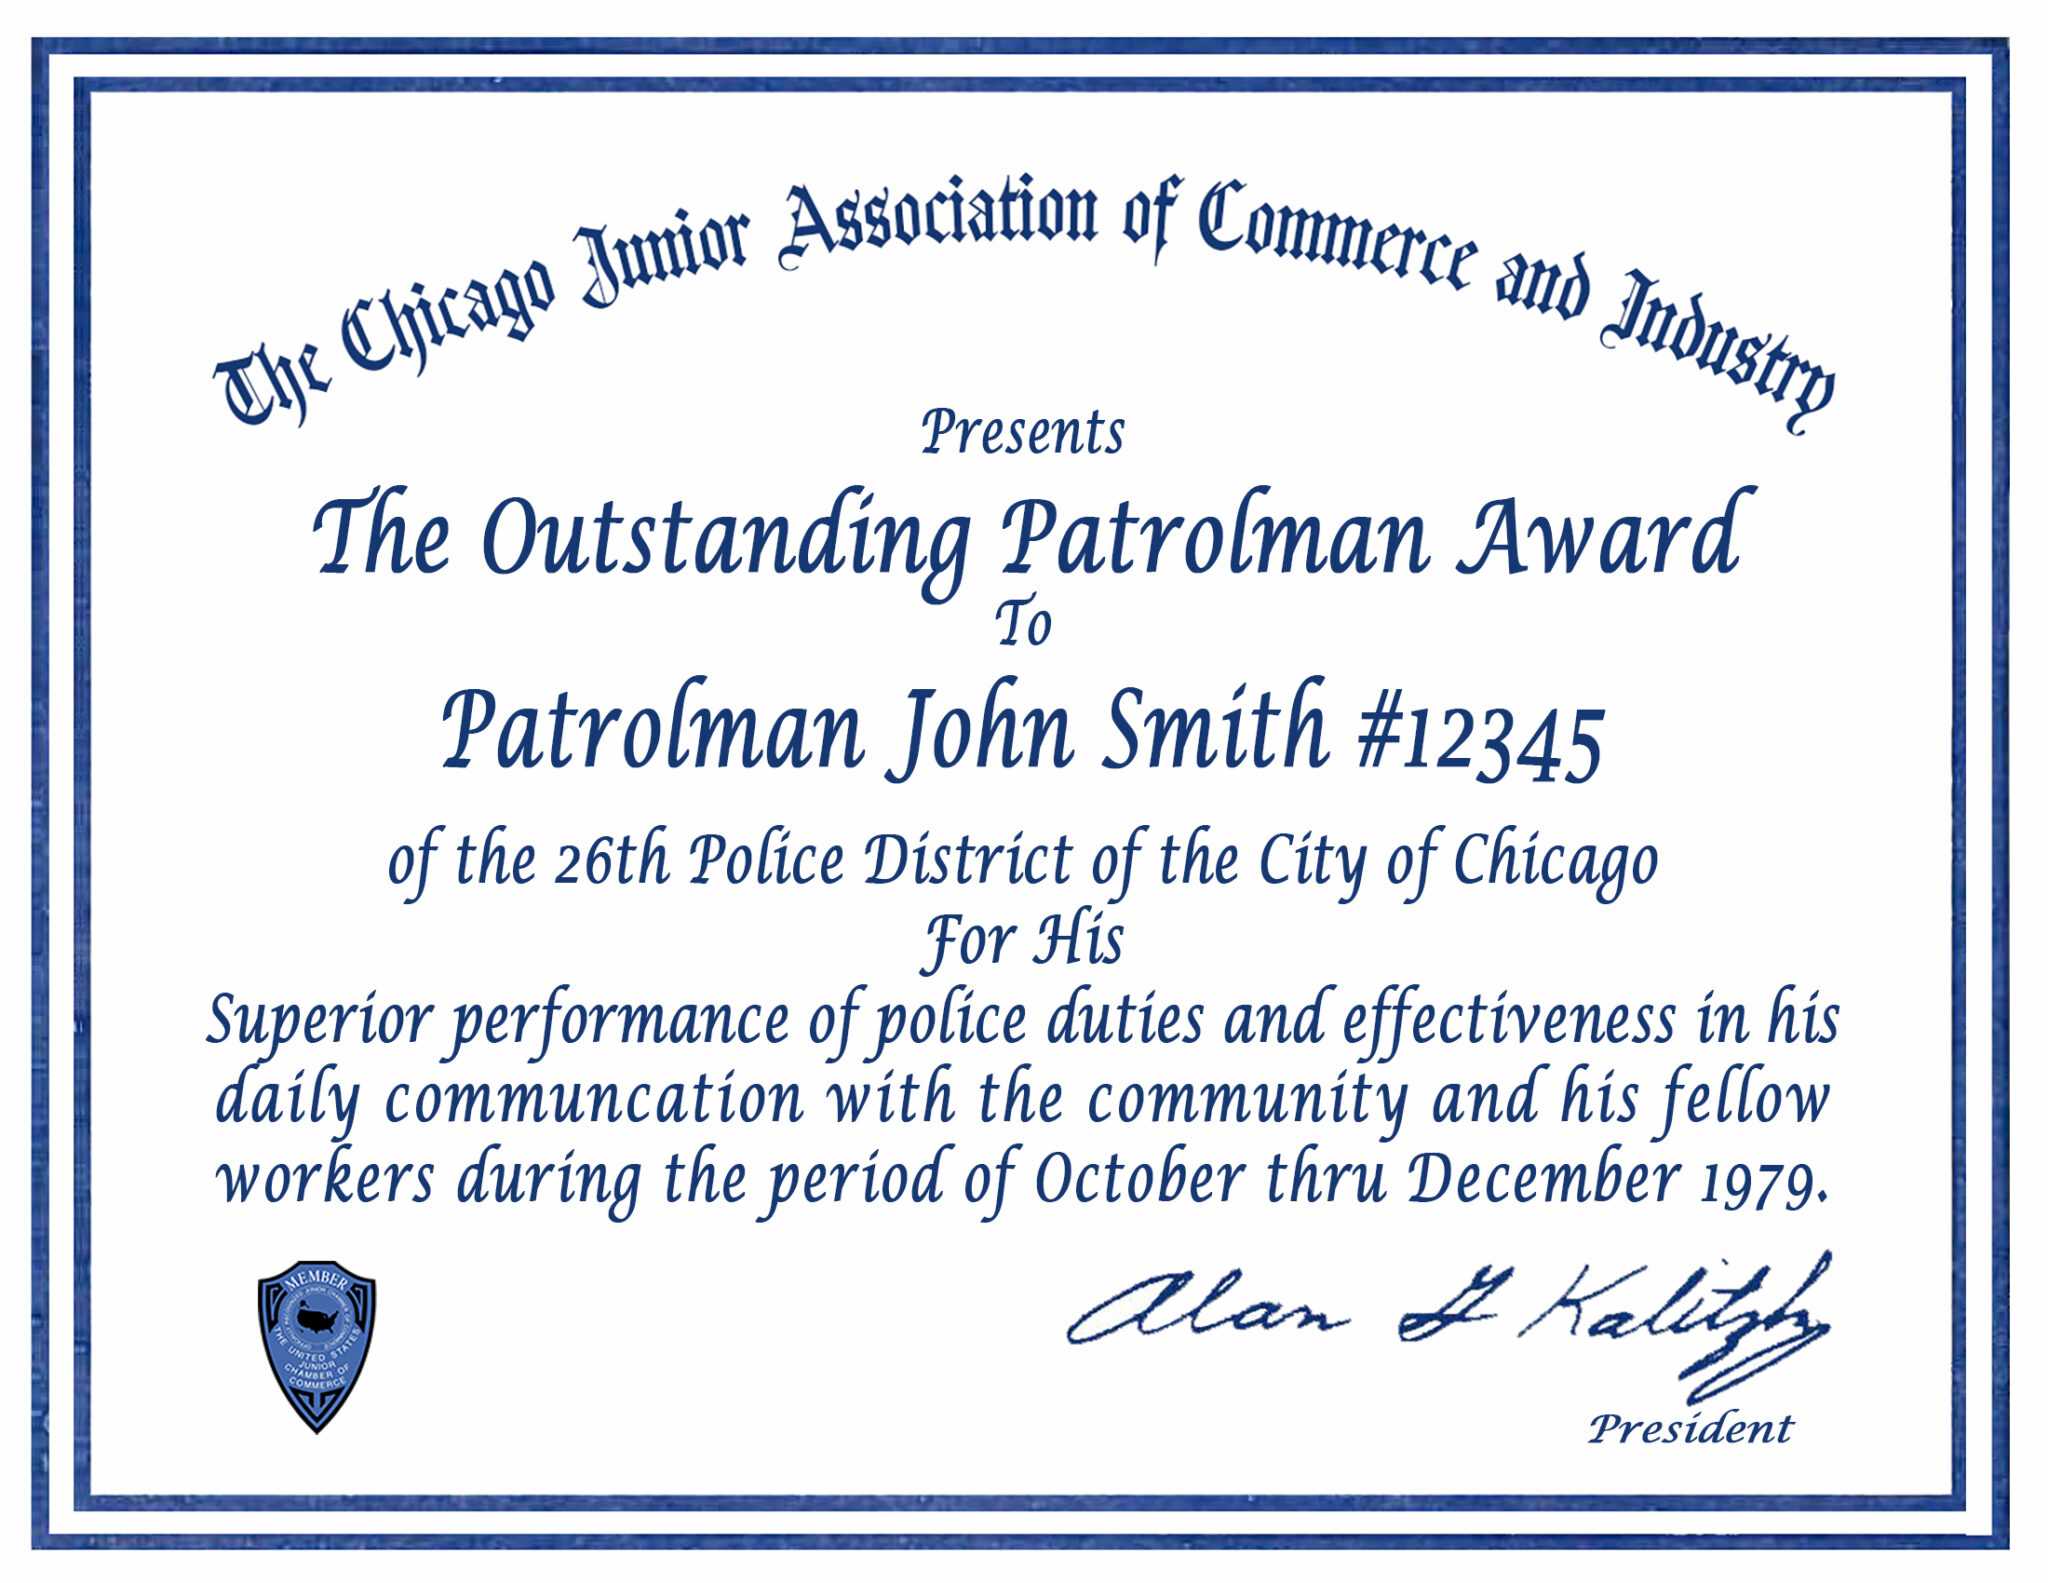 certificate-letter-awards-chicagocop-intended-for-life-saving-award